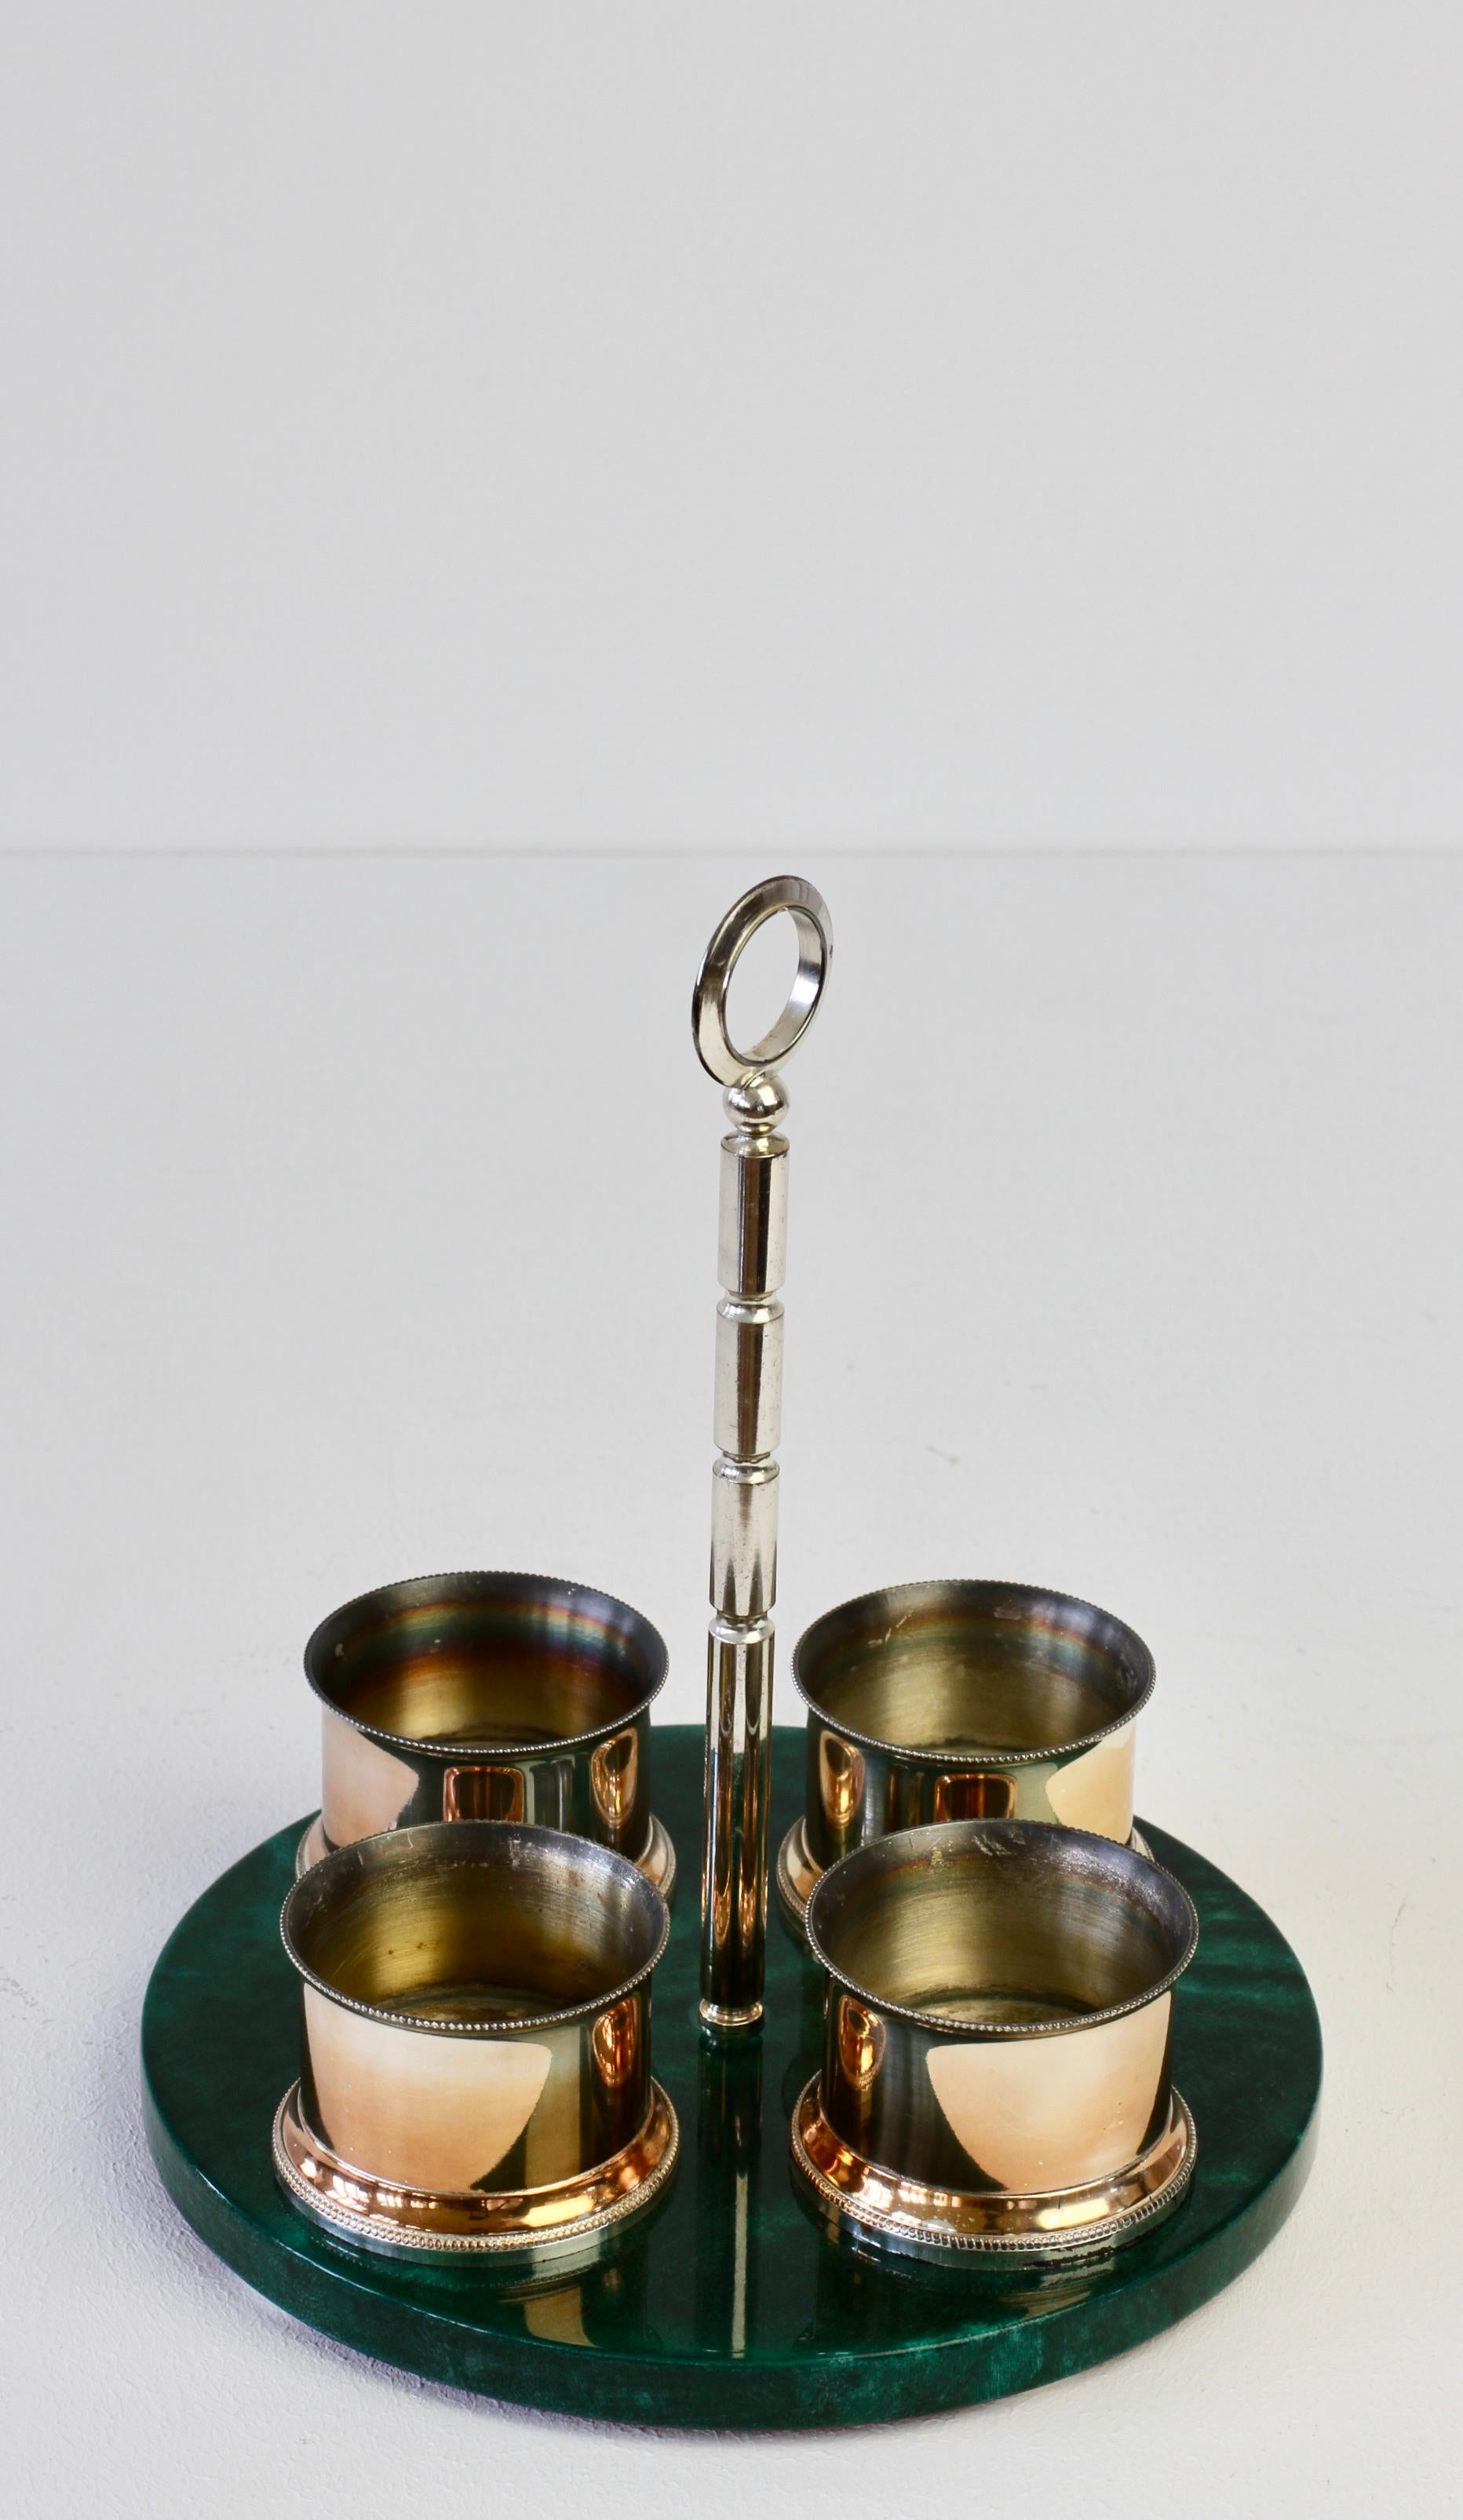 Lacquered Aldo Tura 1960s Vintage Midcentury Condiments Stand in Green Italian Goatskin